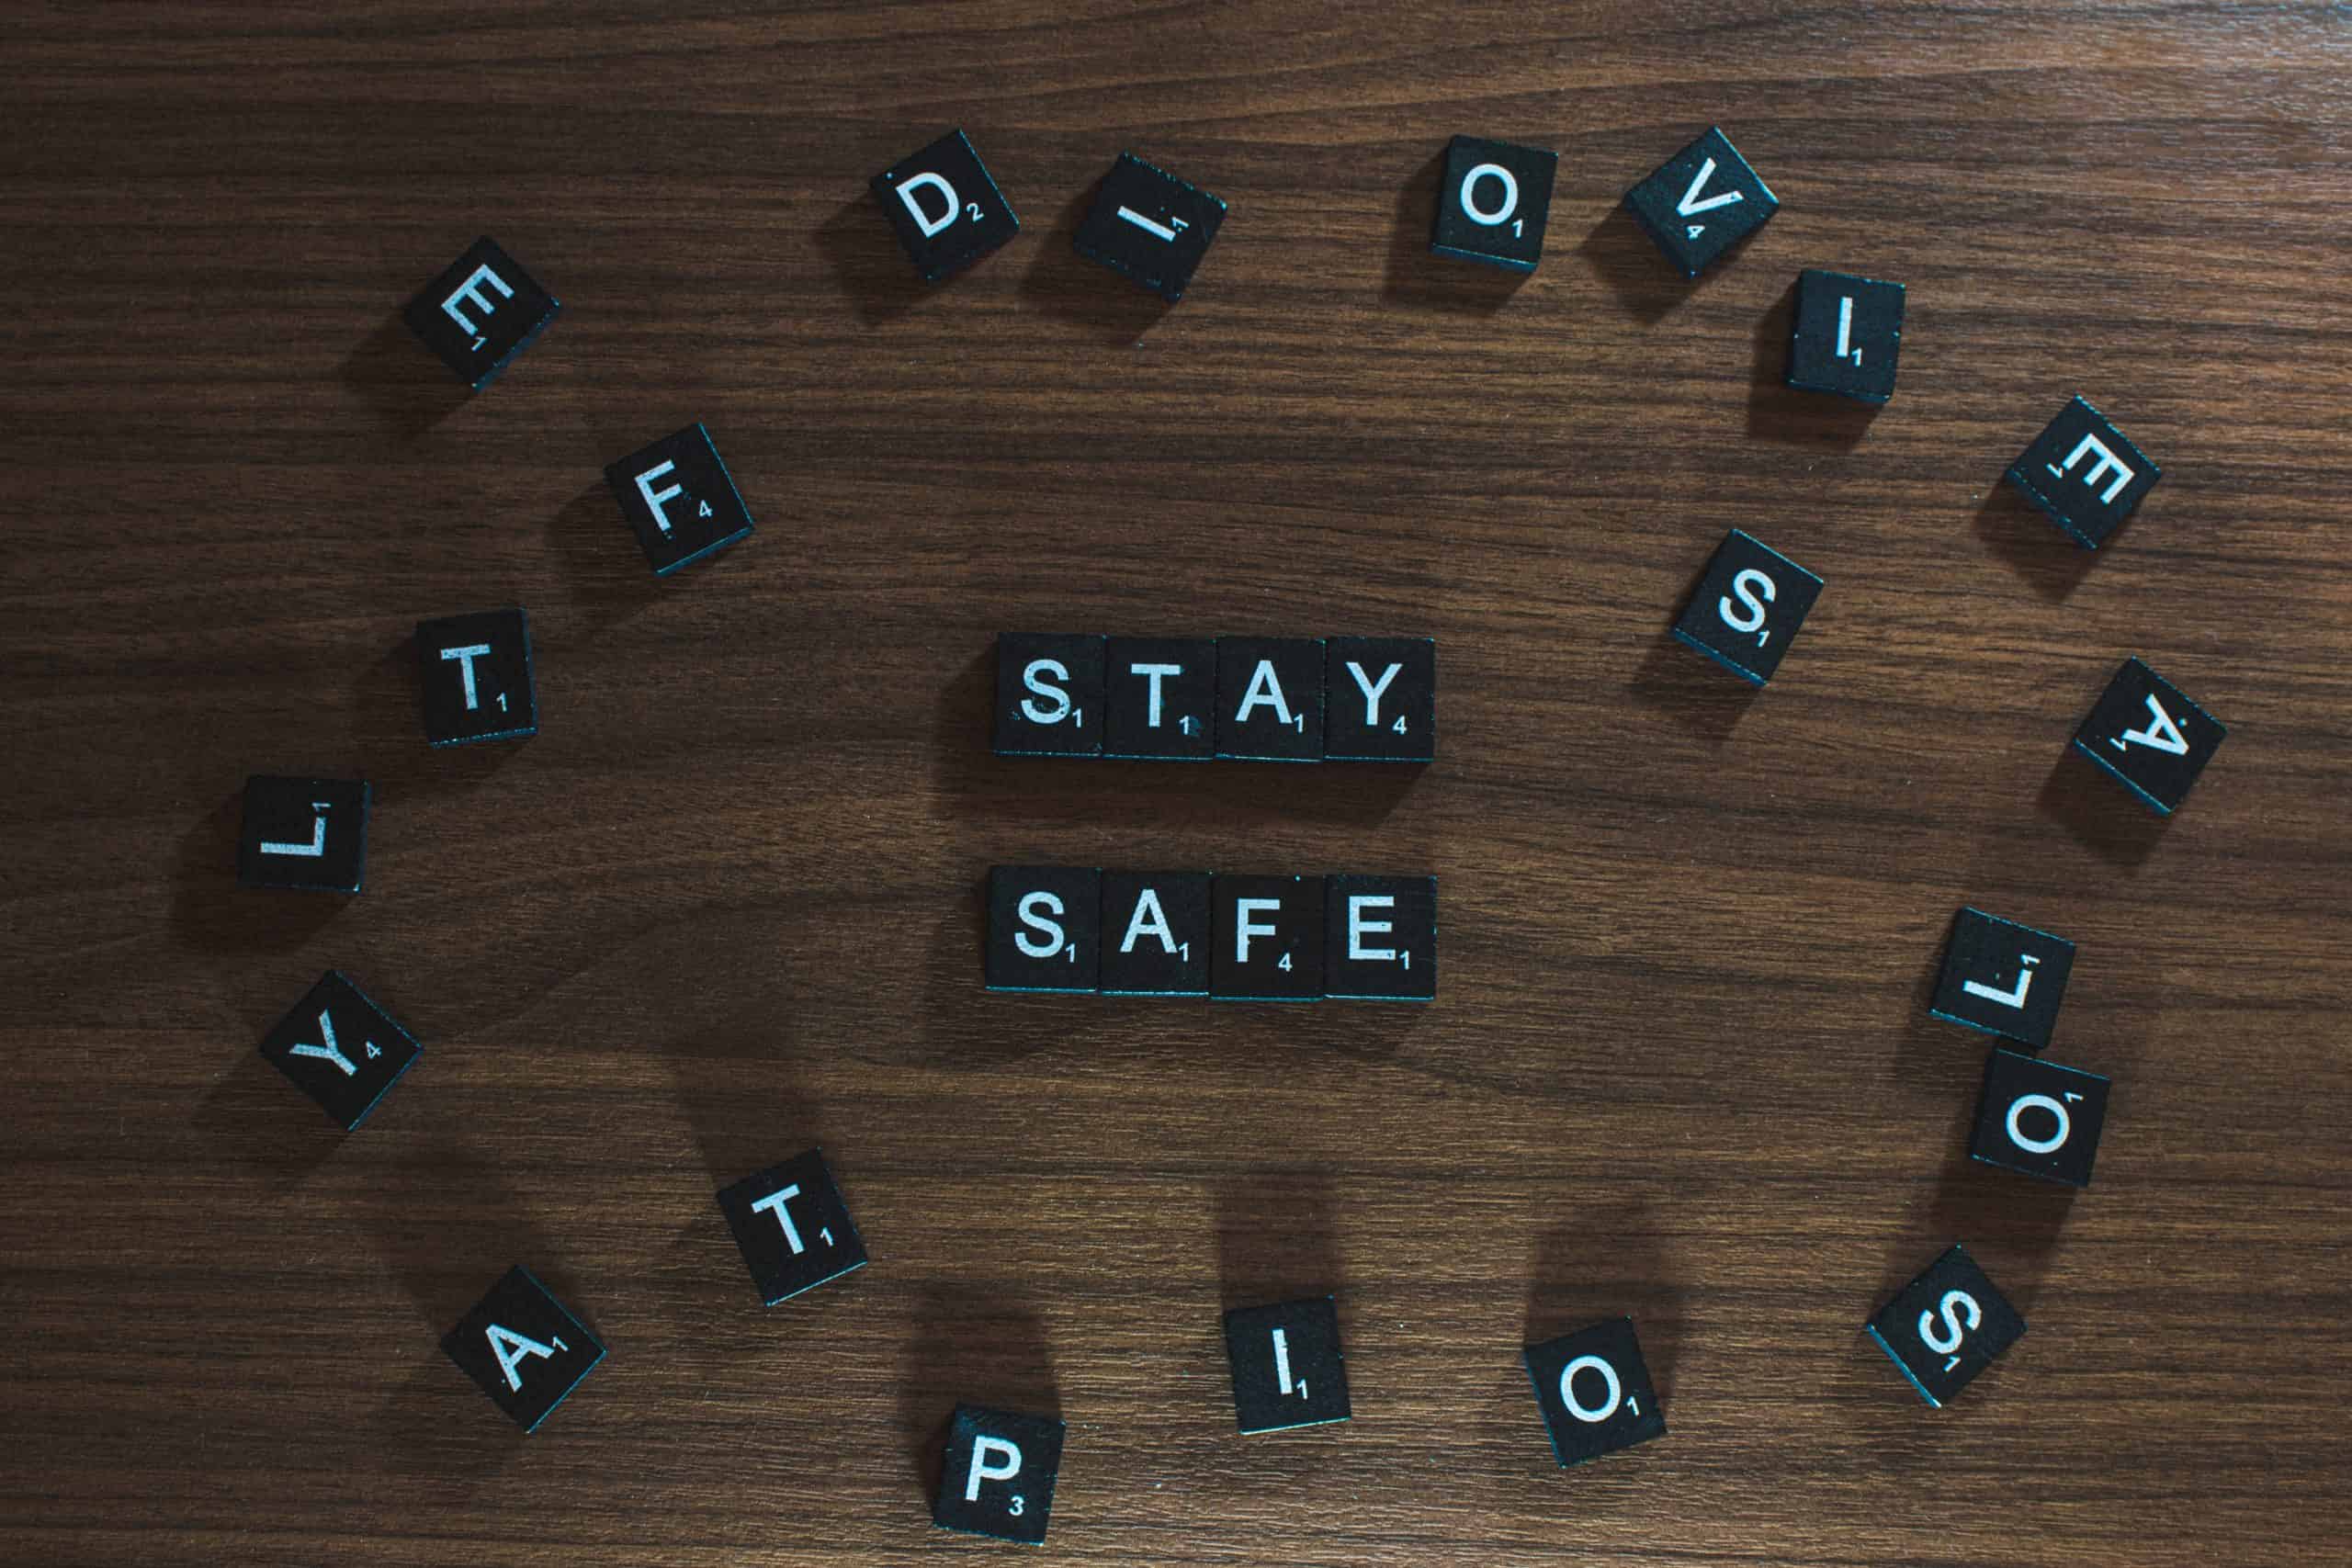 Stay safe spelled out in scrabble pieces on a desk